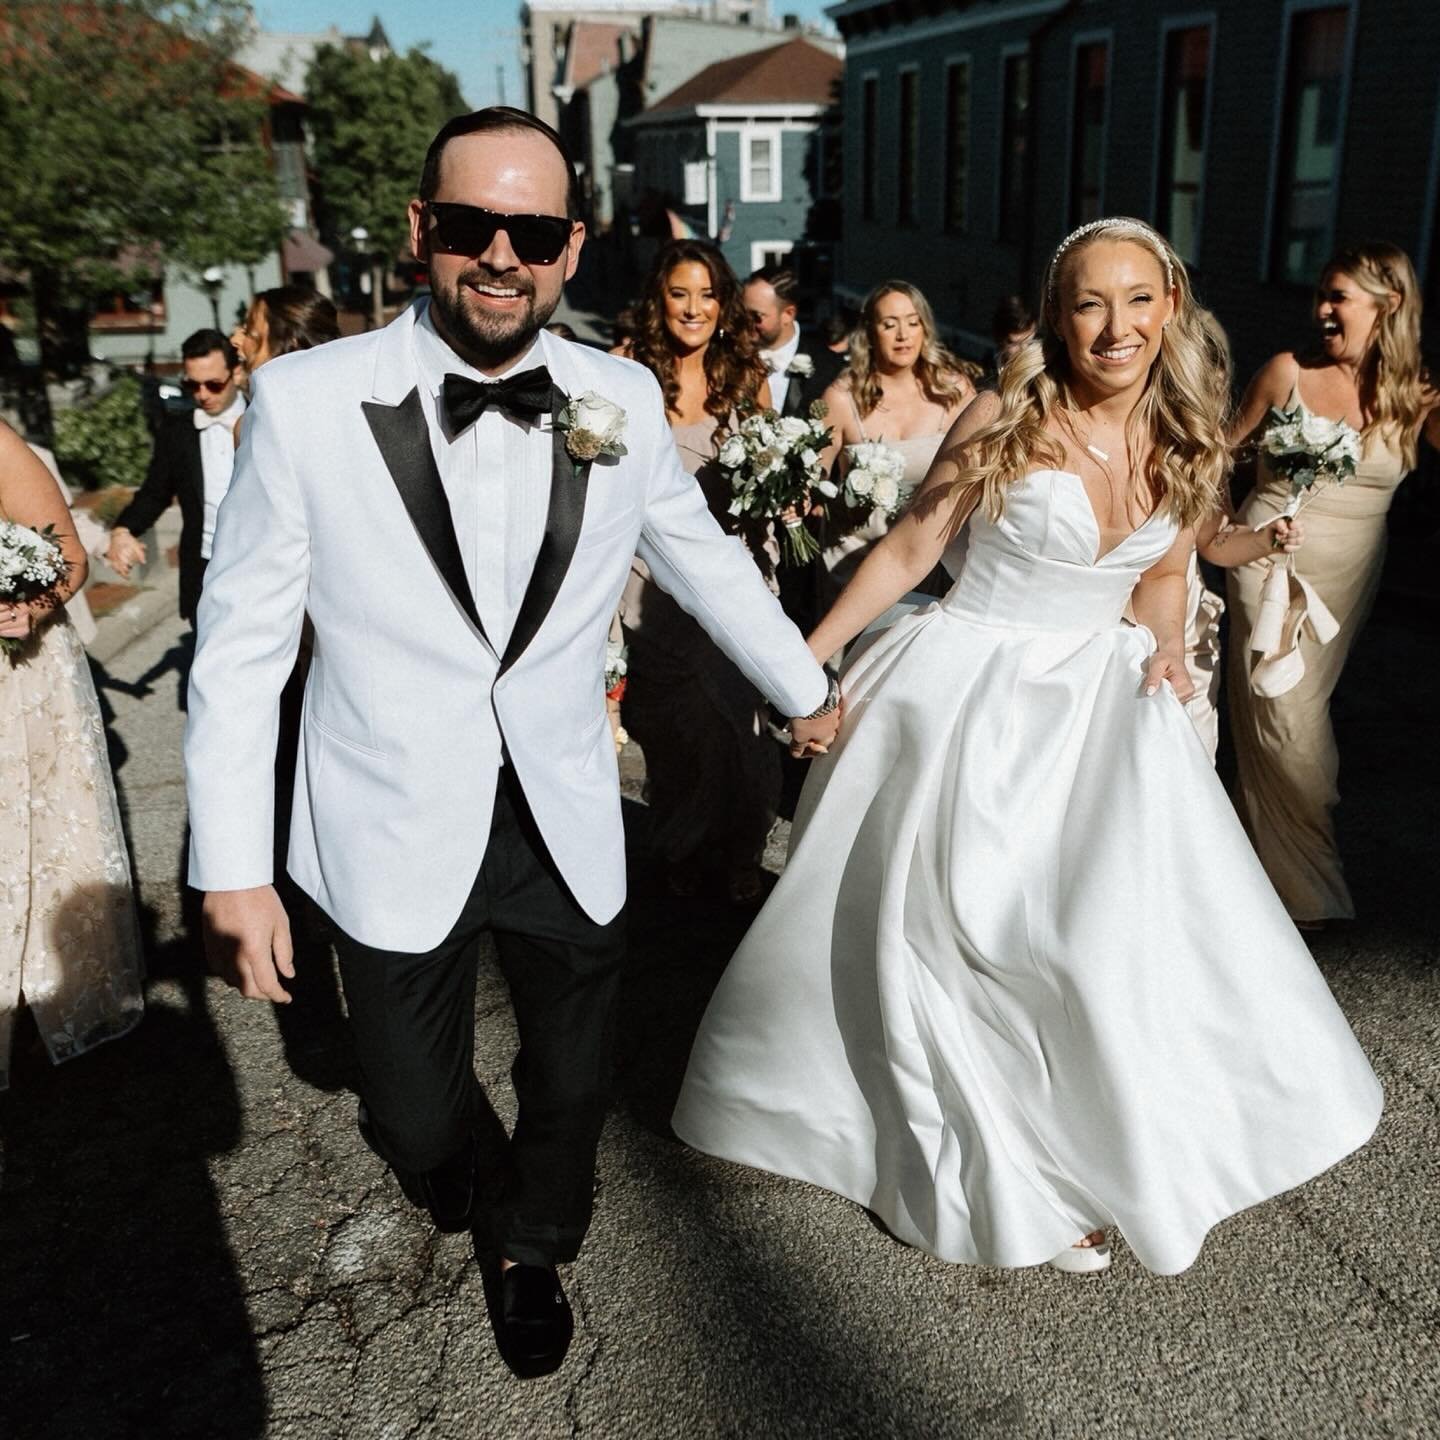 When your ceremony is two blocks away from your reception parading down the road with all your loved ones only makes sense! @stringsource_cincinnati lead parade for Bri + Seth&rsquo;s and set the tone for the celebration that was awaiting them at the